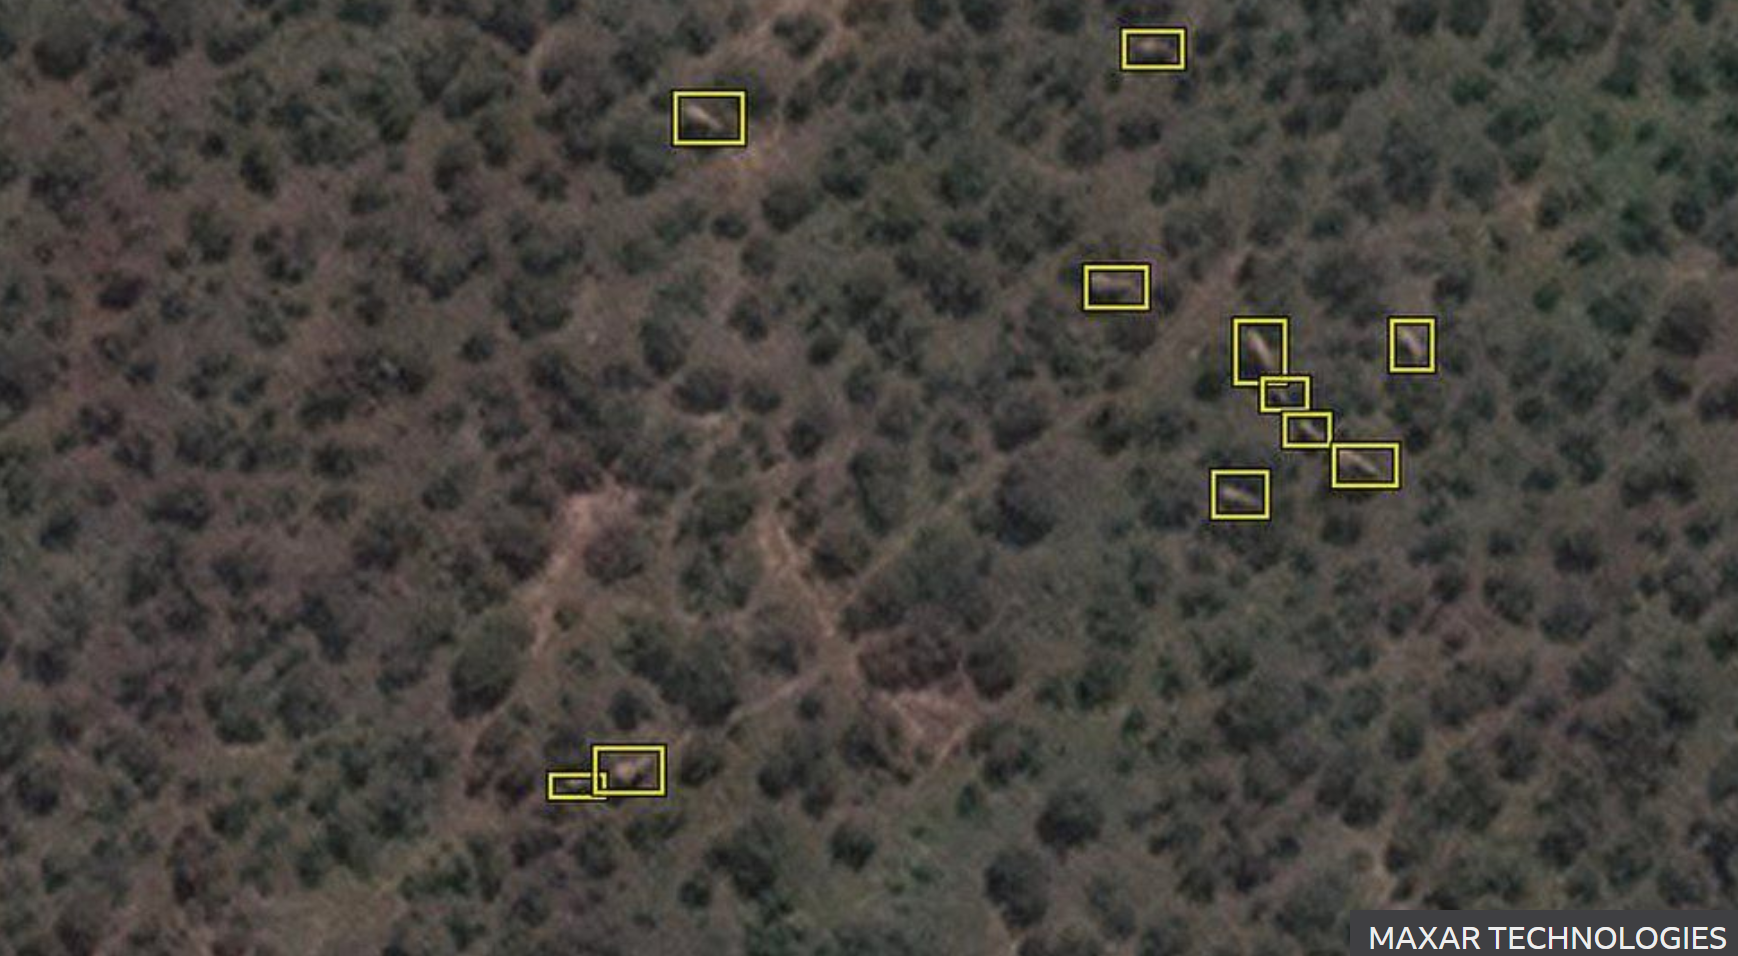 Pictures emerging from anti-poaching satellite monitoring from space